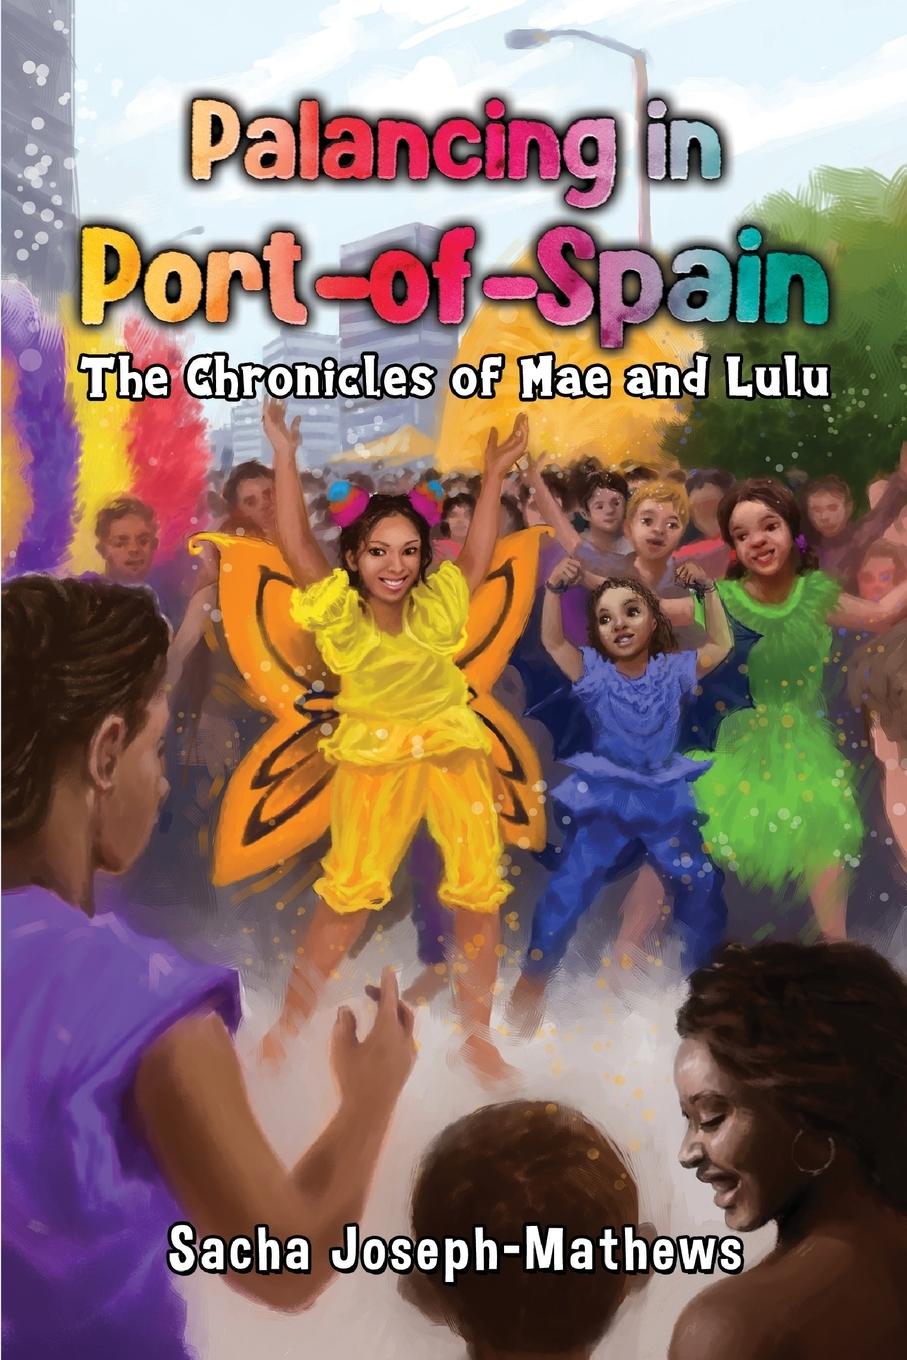 Book Palancing in Port-of-Spain: The Chronicles of Mae and Lulu 